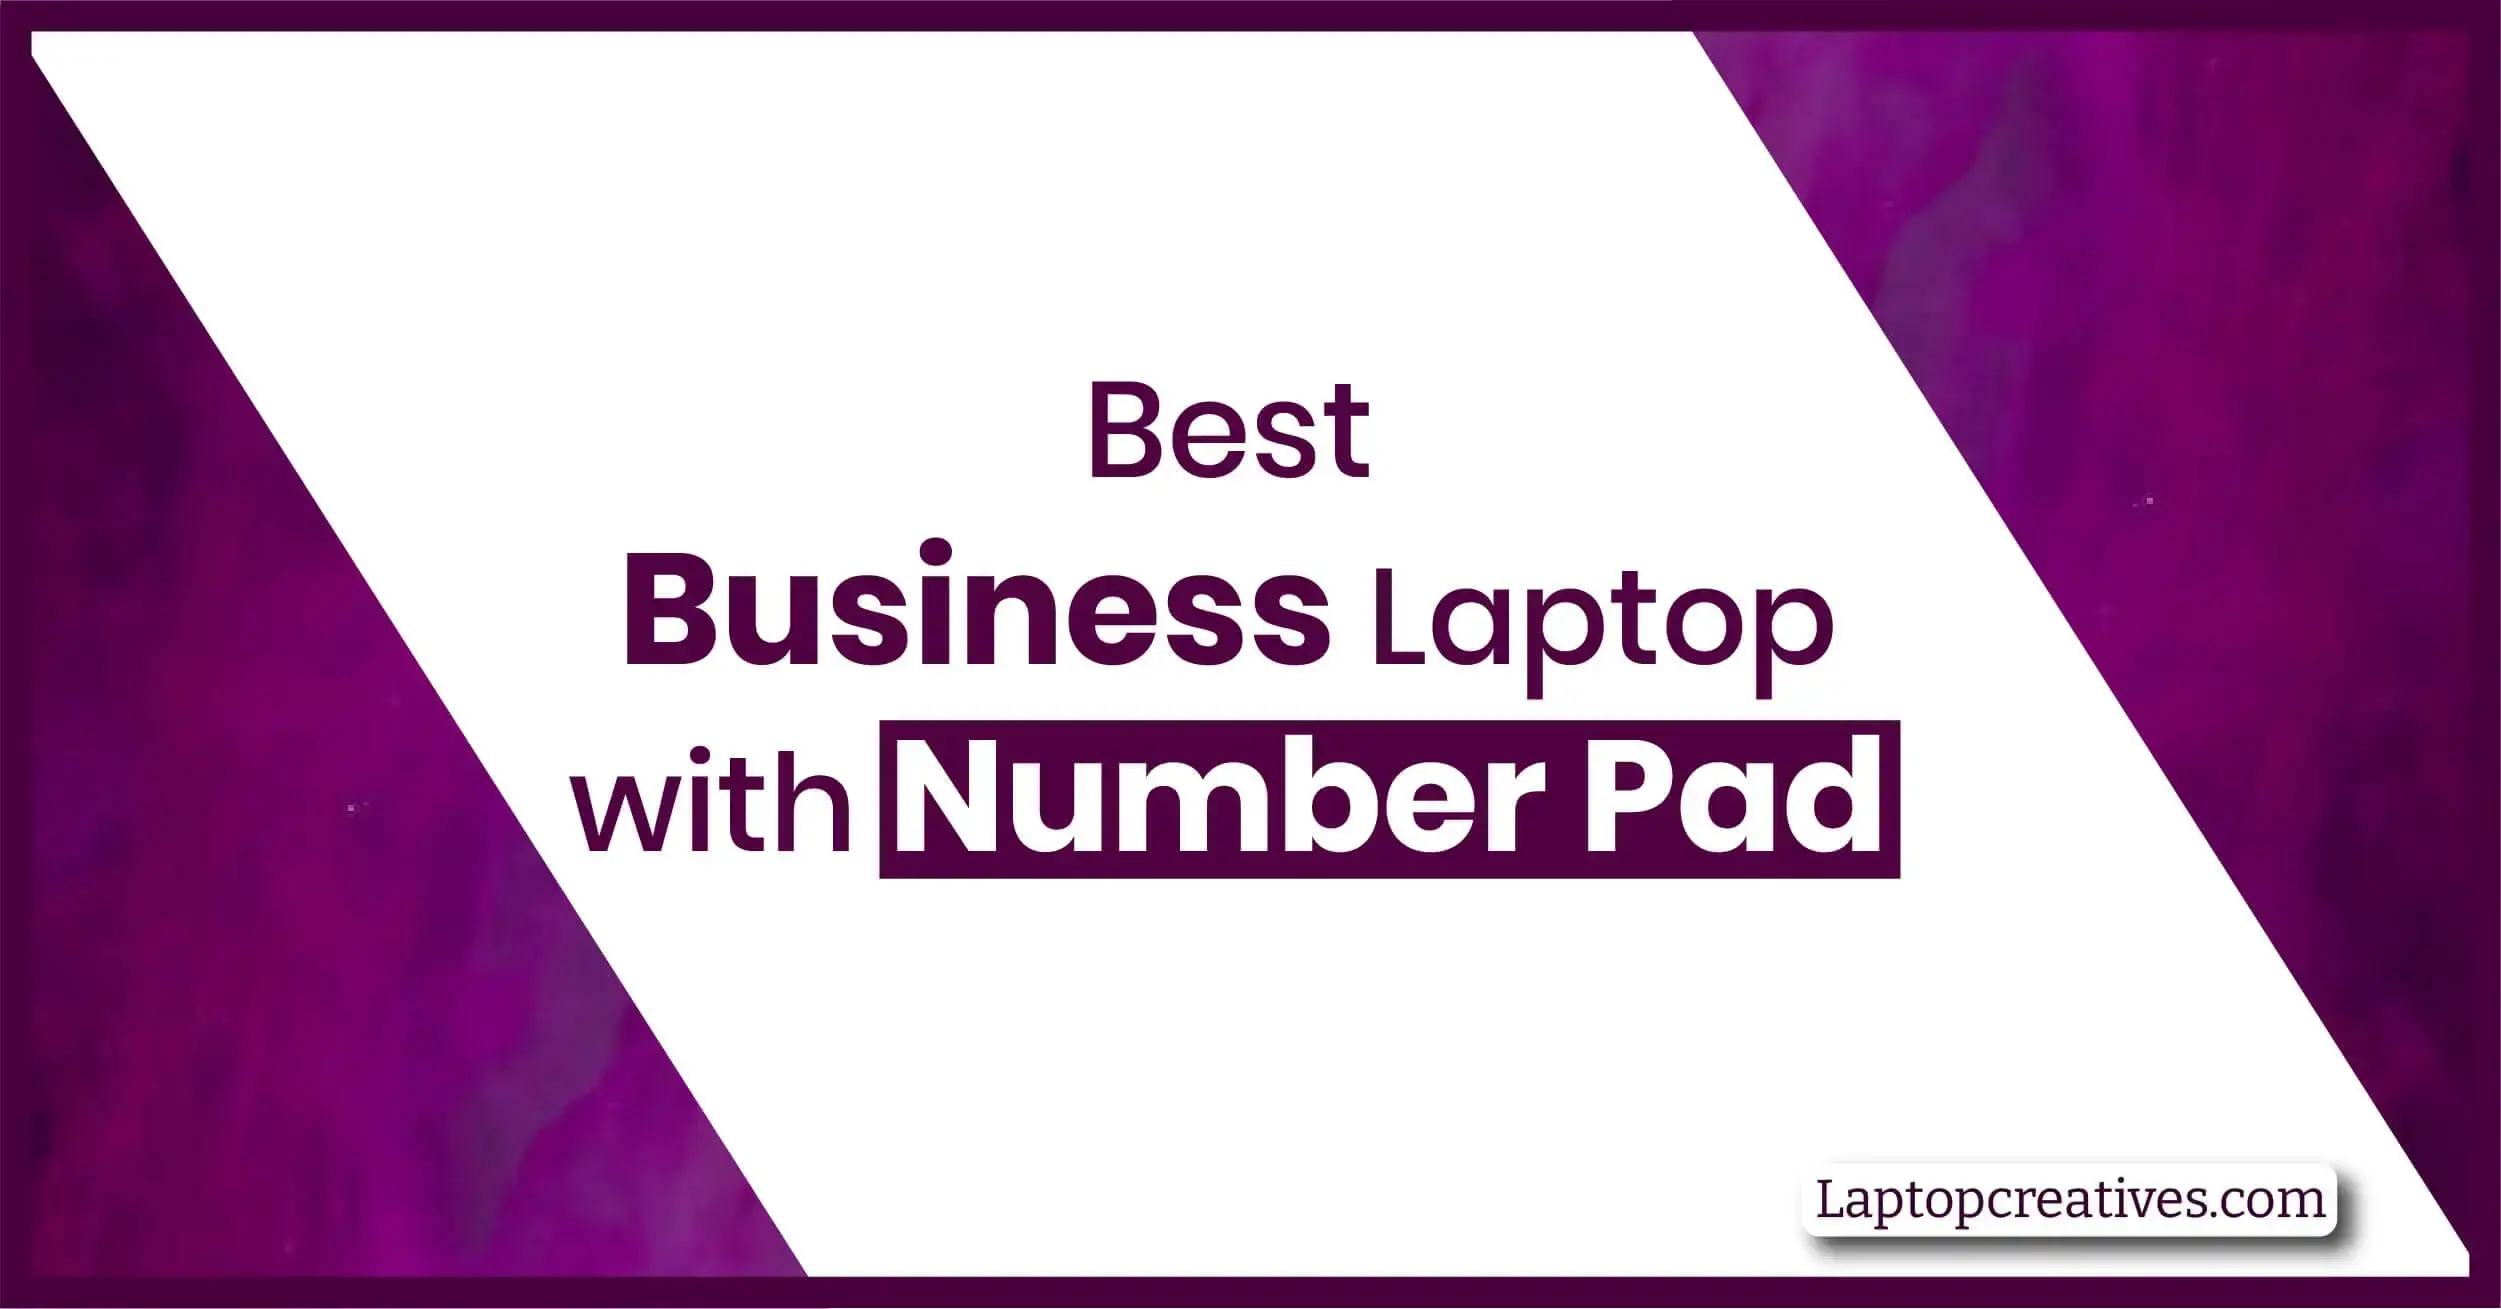 Best Business Laptop with Number Pad